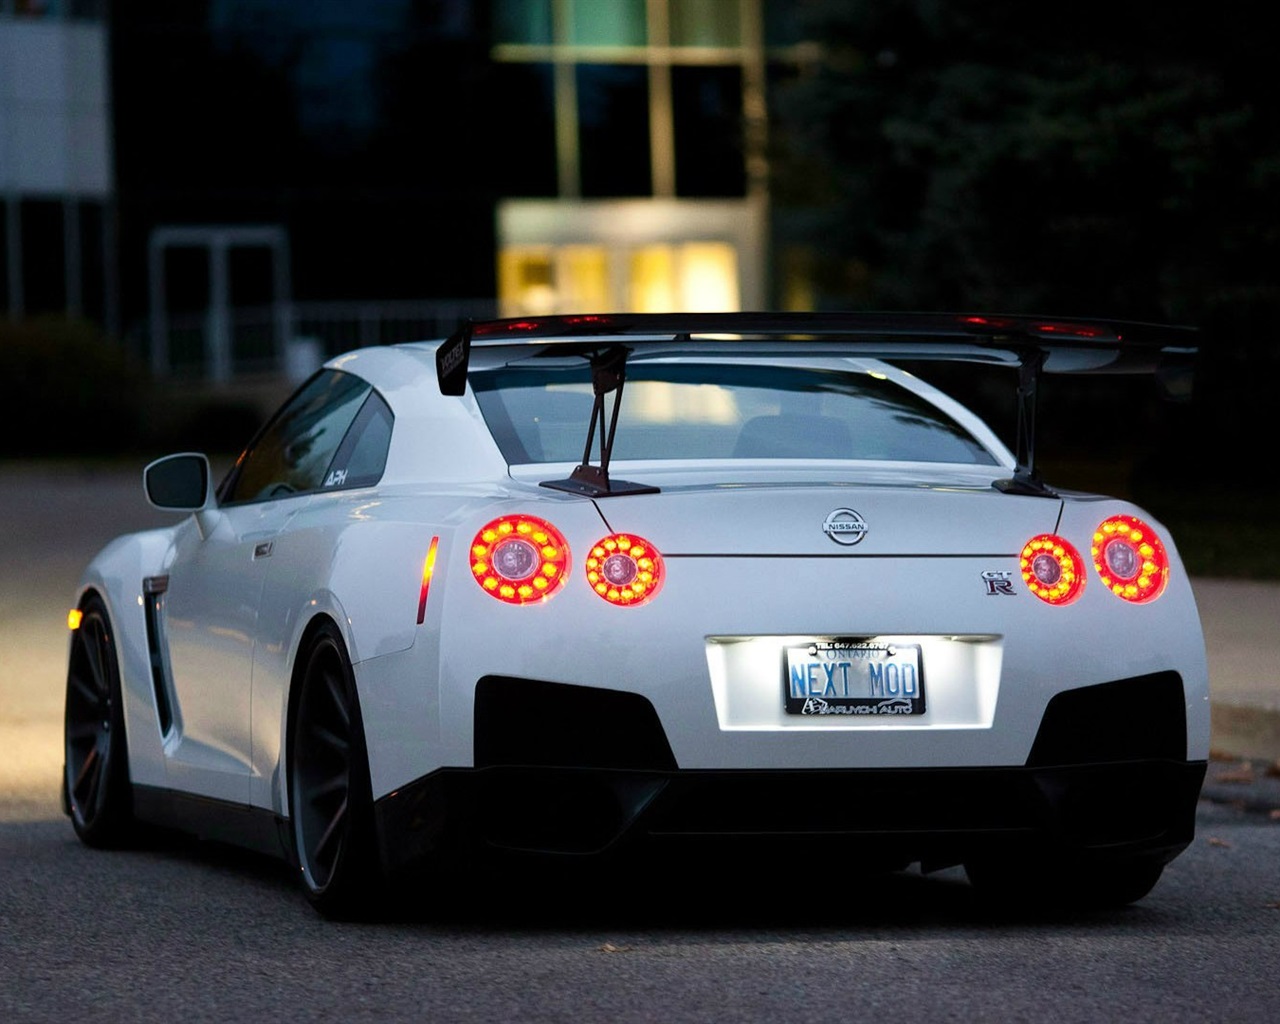 Wallpaper Nissan GTR R35 white car at evening 1920x1080 Full HD 2K Picture, Image